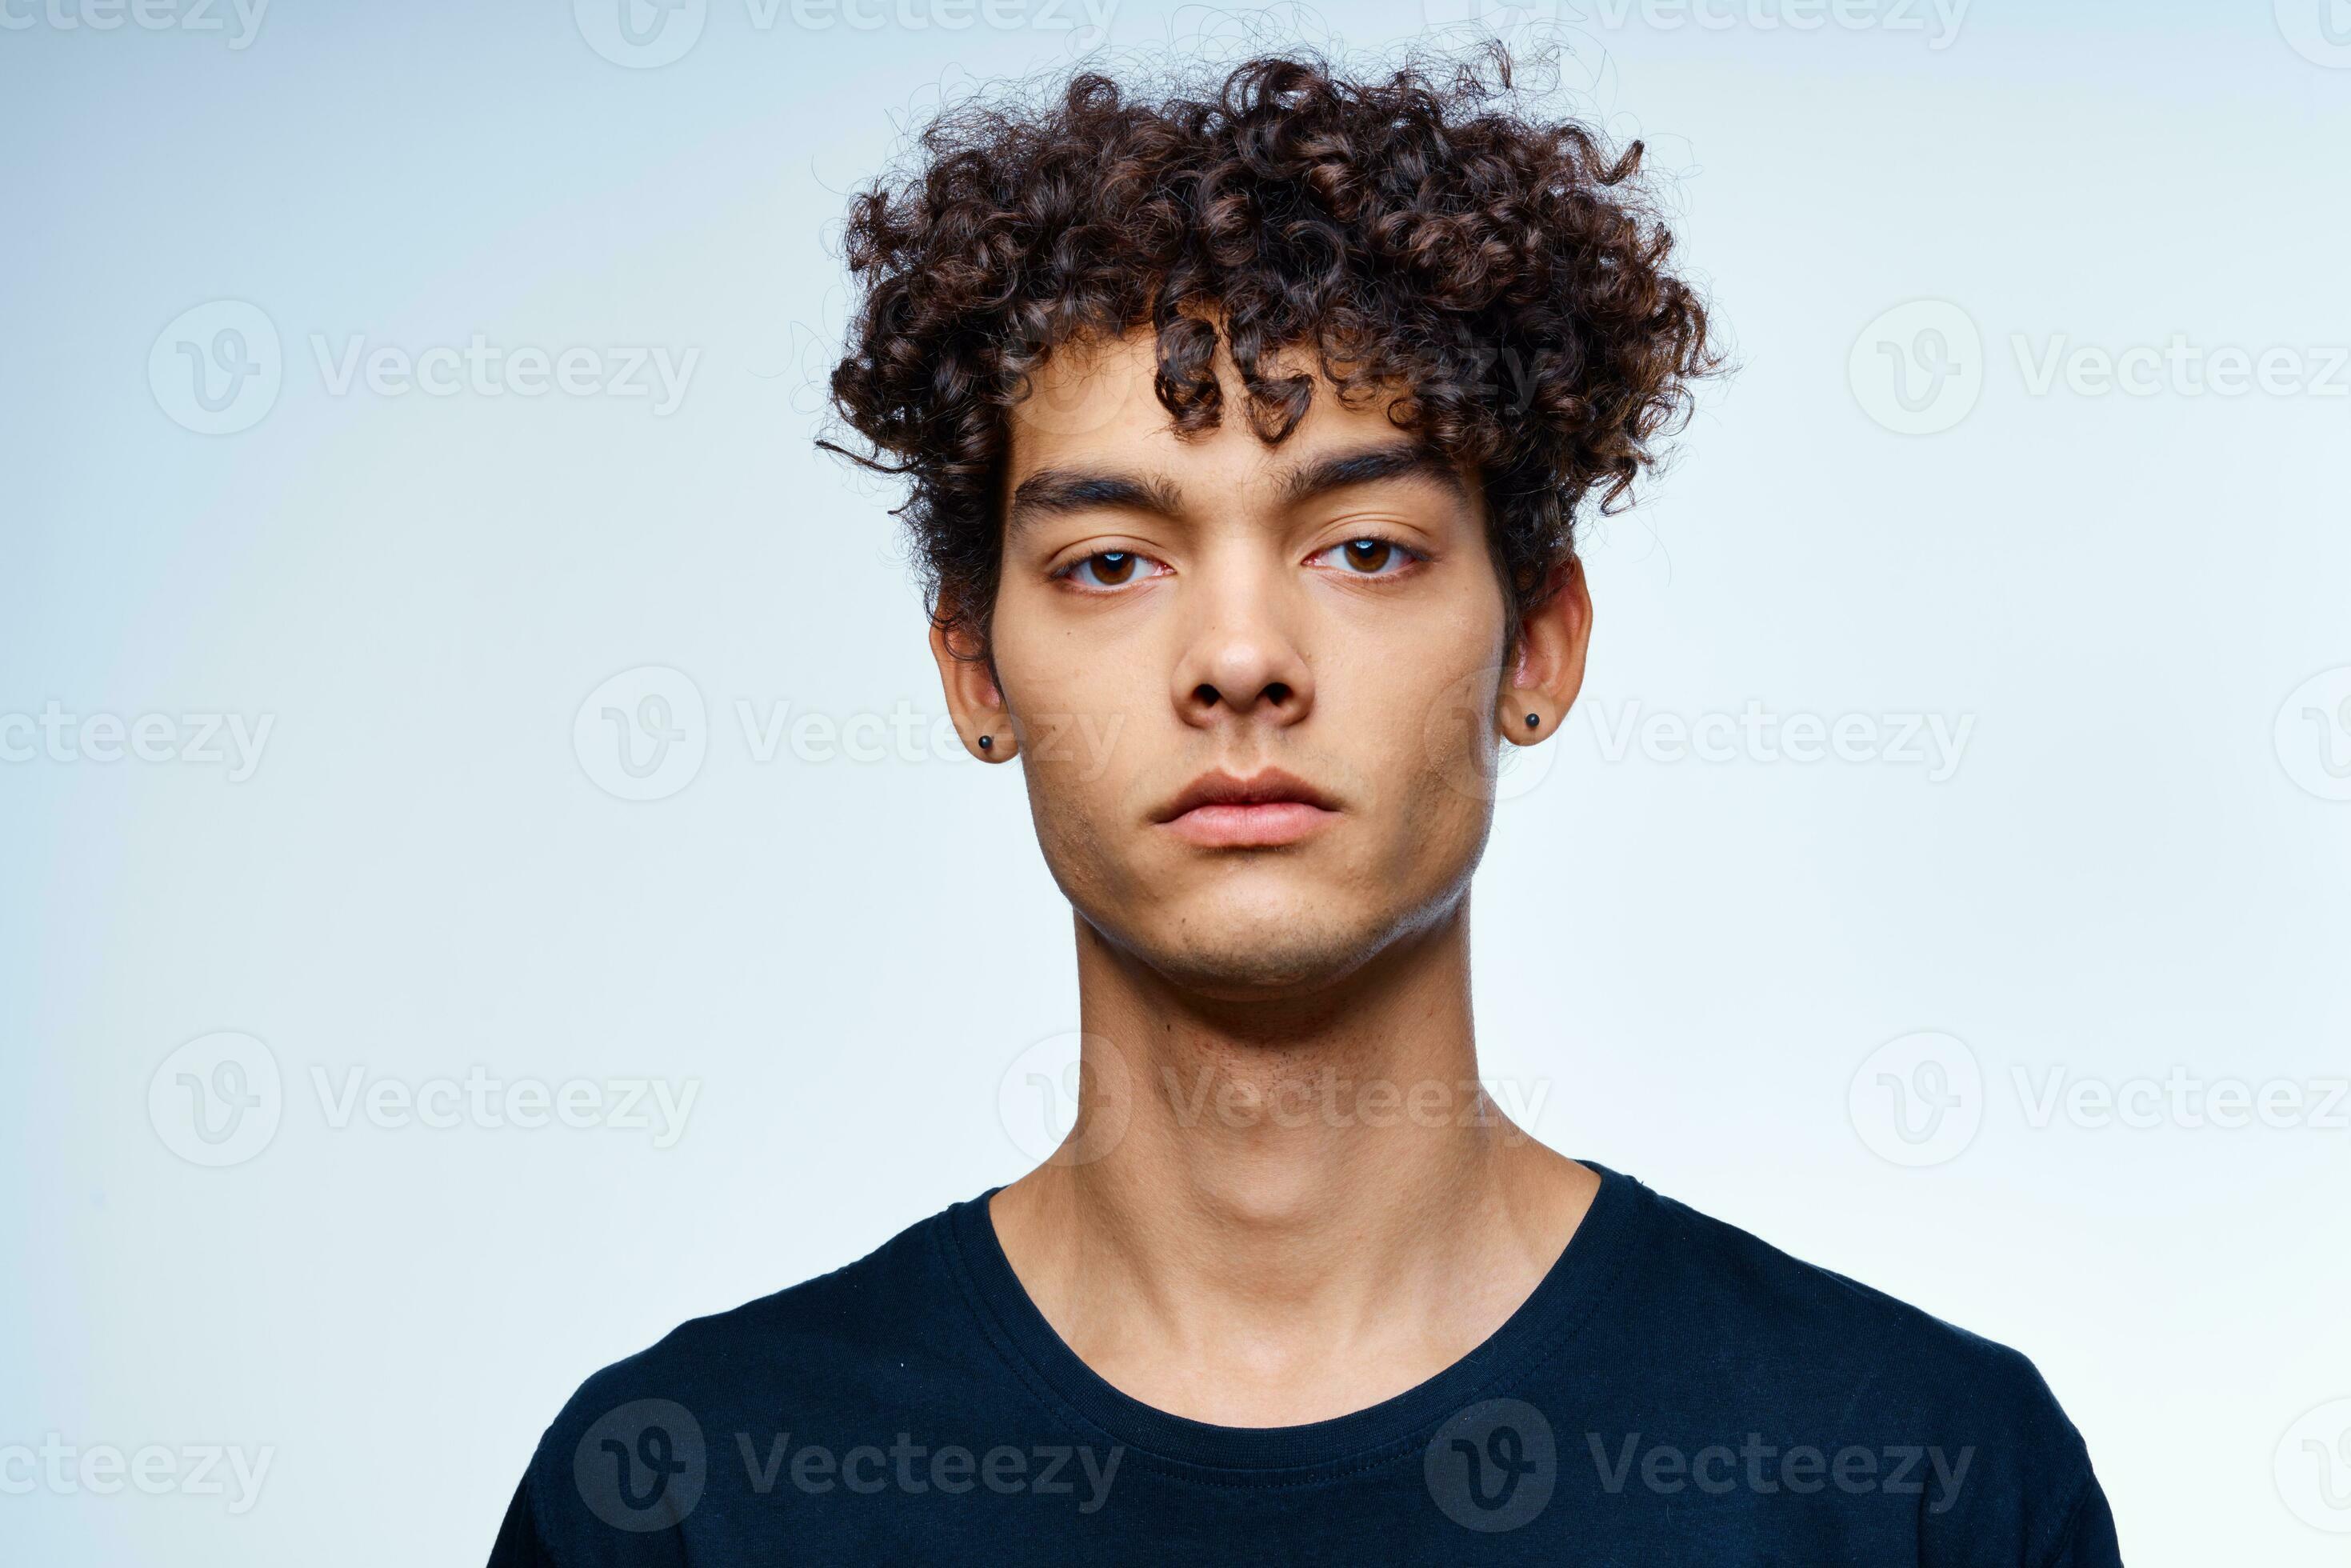 Blond Guy with Curly Hair - wide 3